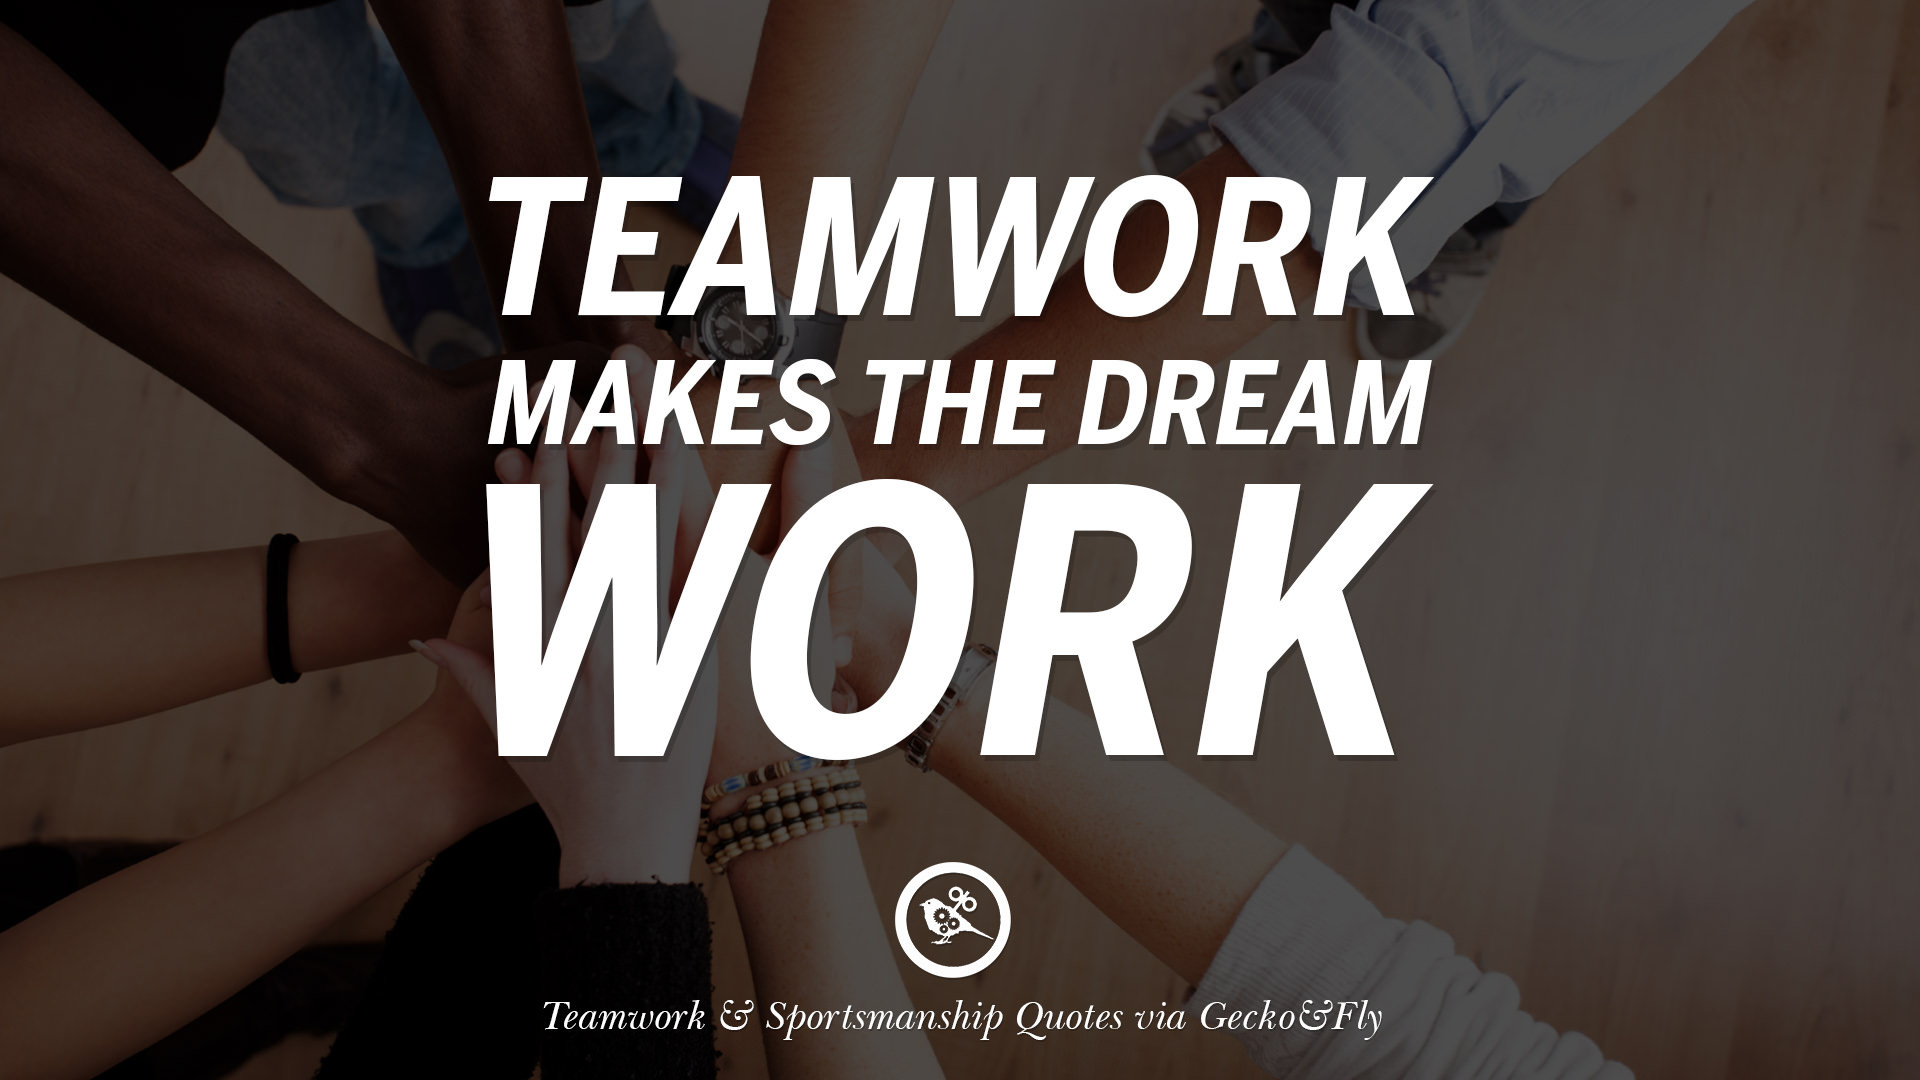 Inspirational Teamwork Quotes
 50 Inspirational Quotes About Teamwork And Sportsmanship